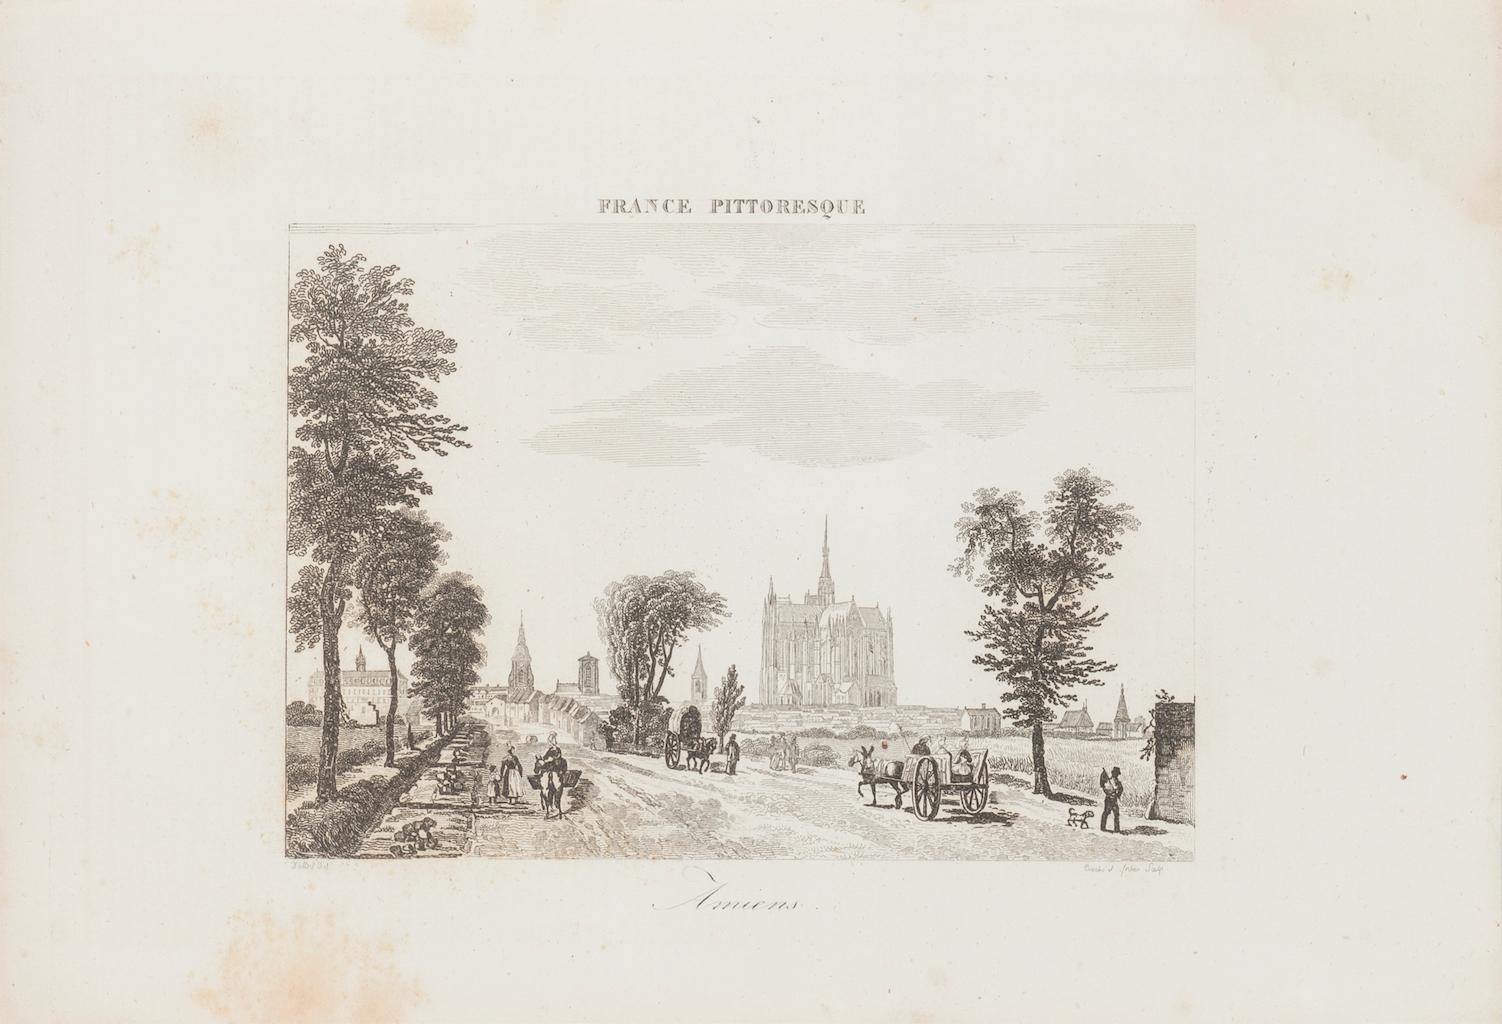 Unknown Figurative Print - View of Amiens - Original Etching - 19th Century